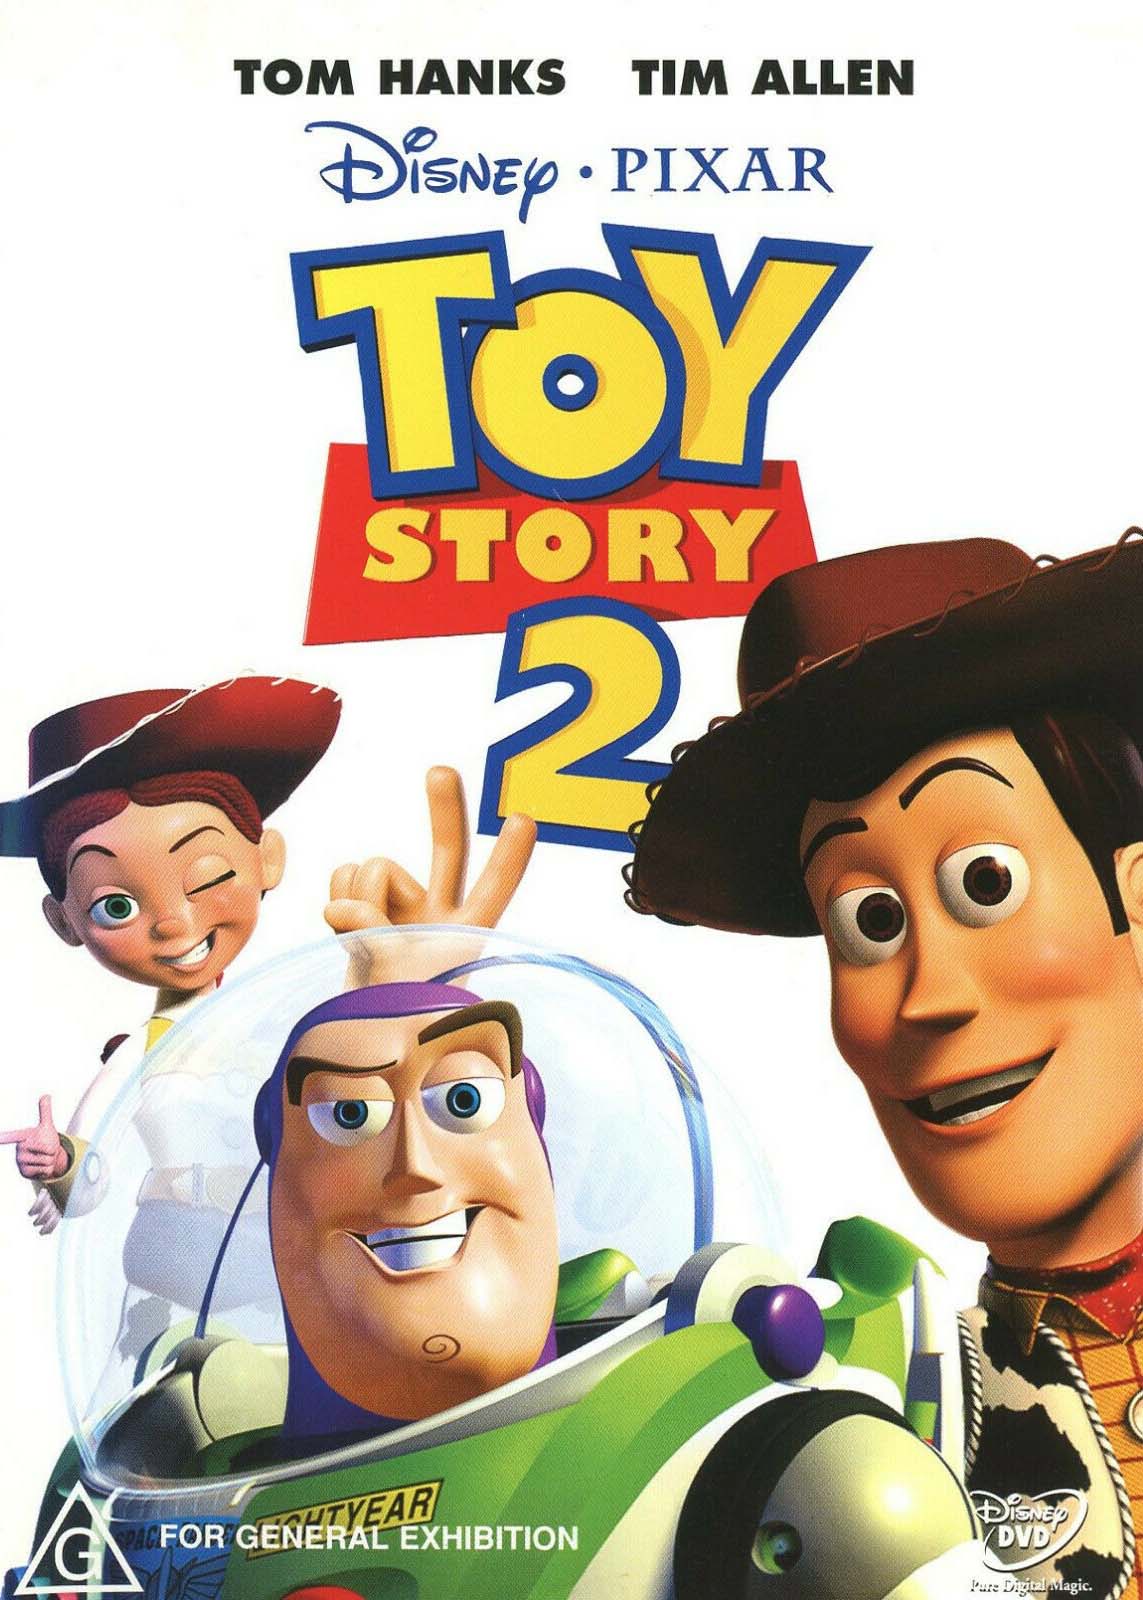 Toy Story 5 - Cast, Possible Release Date - Parade